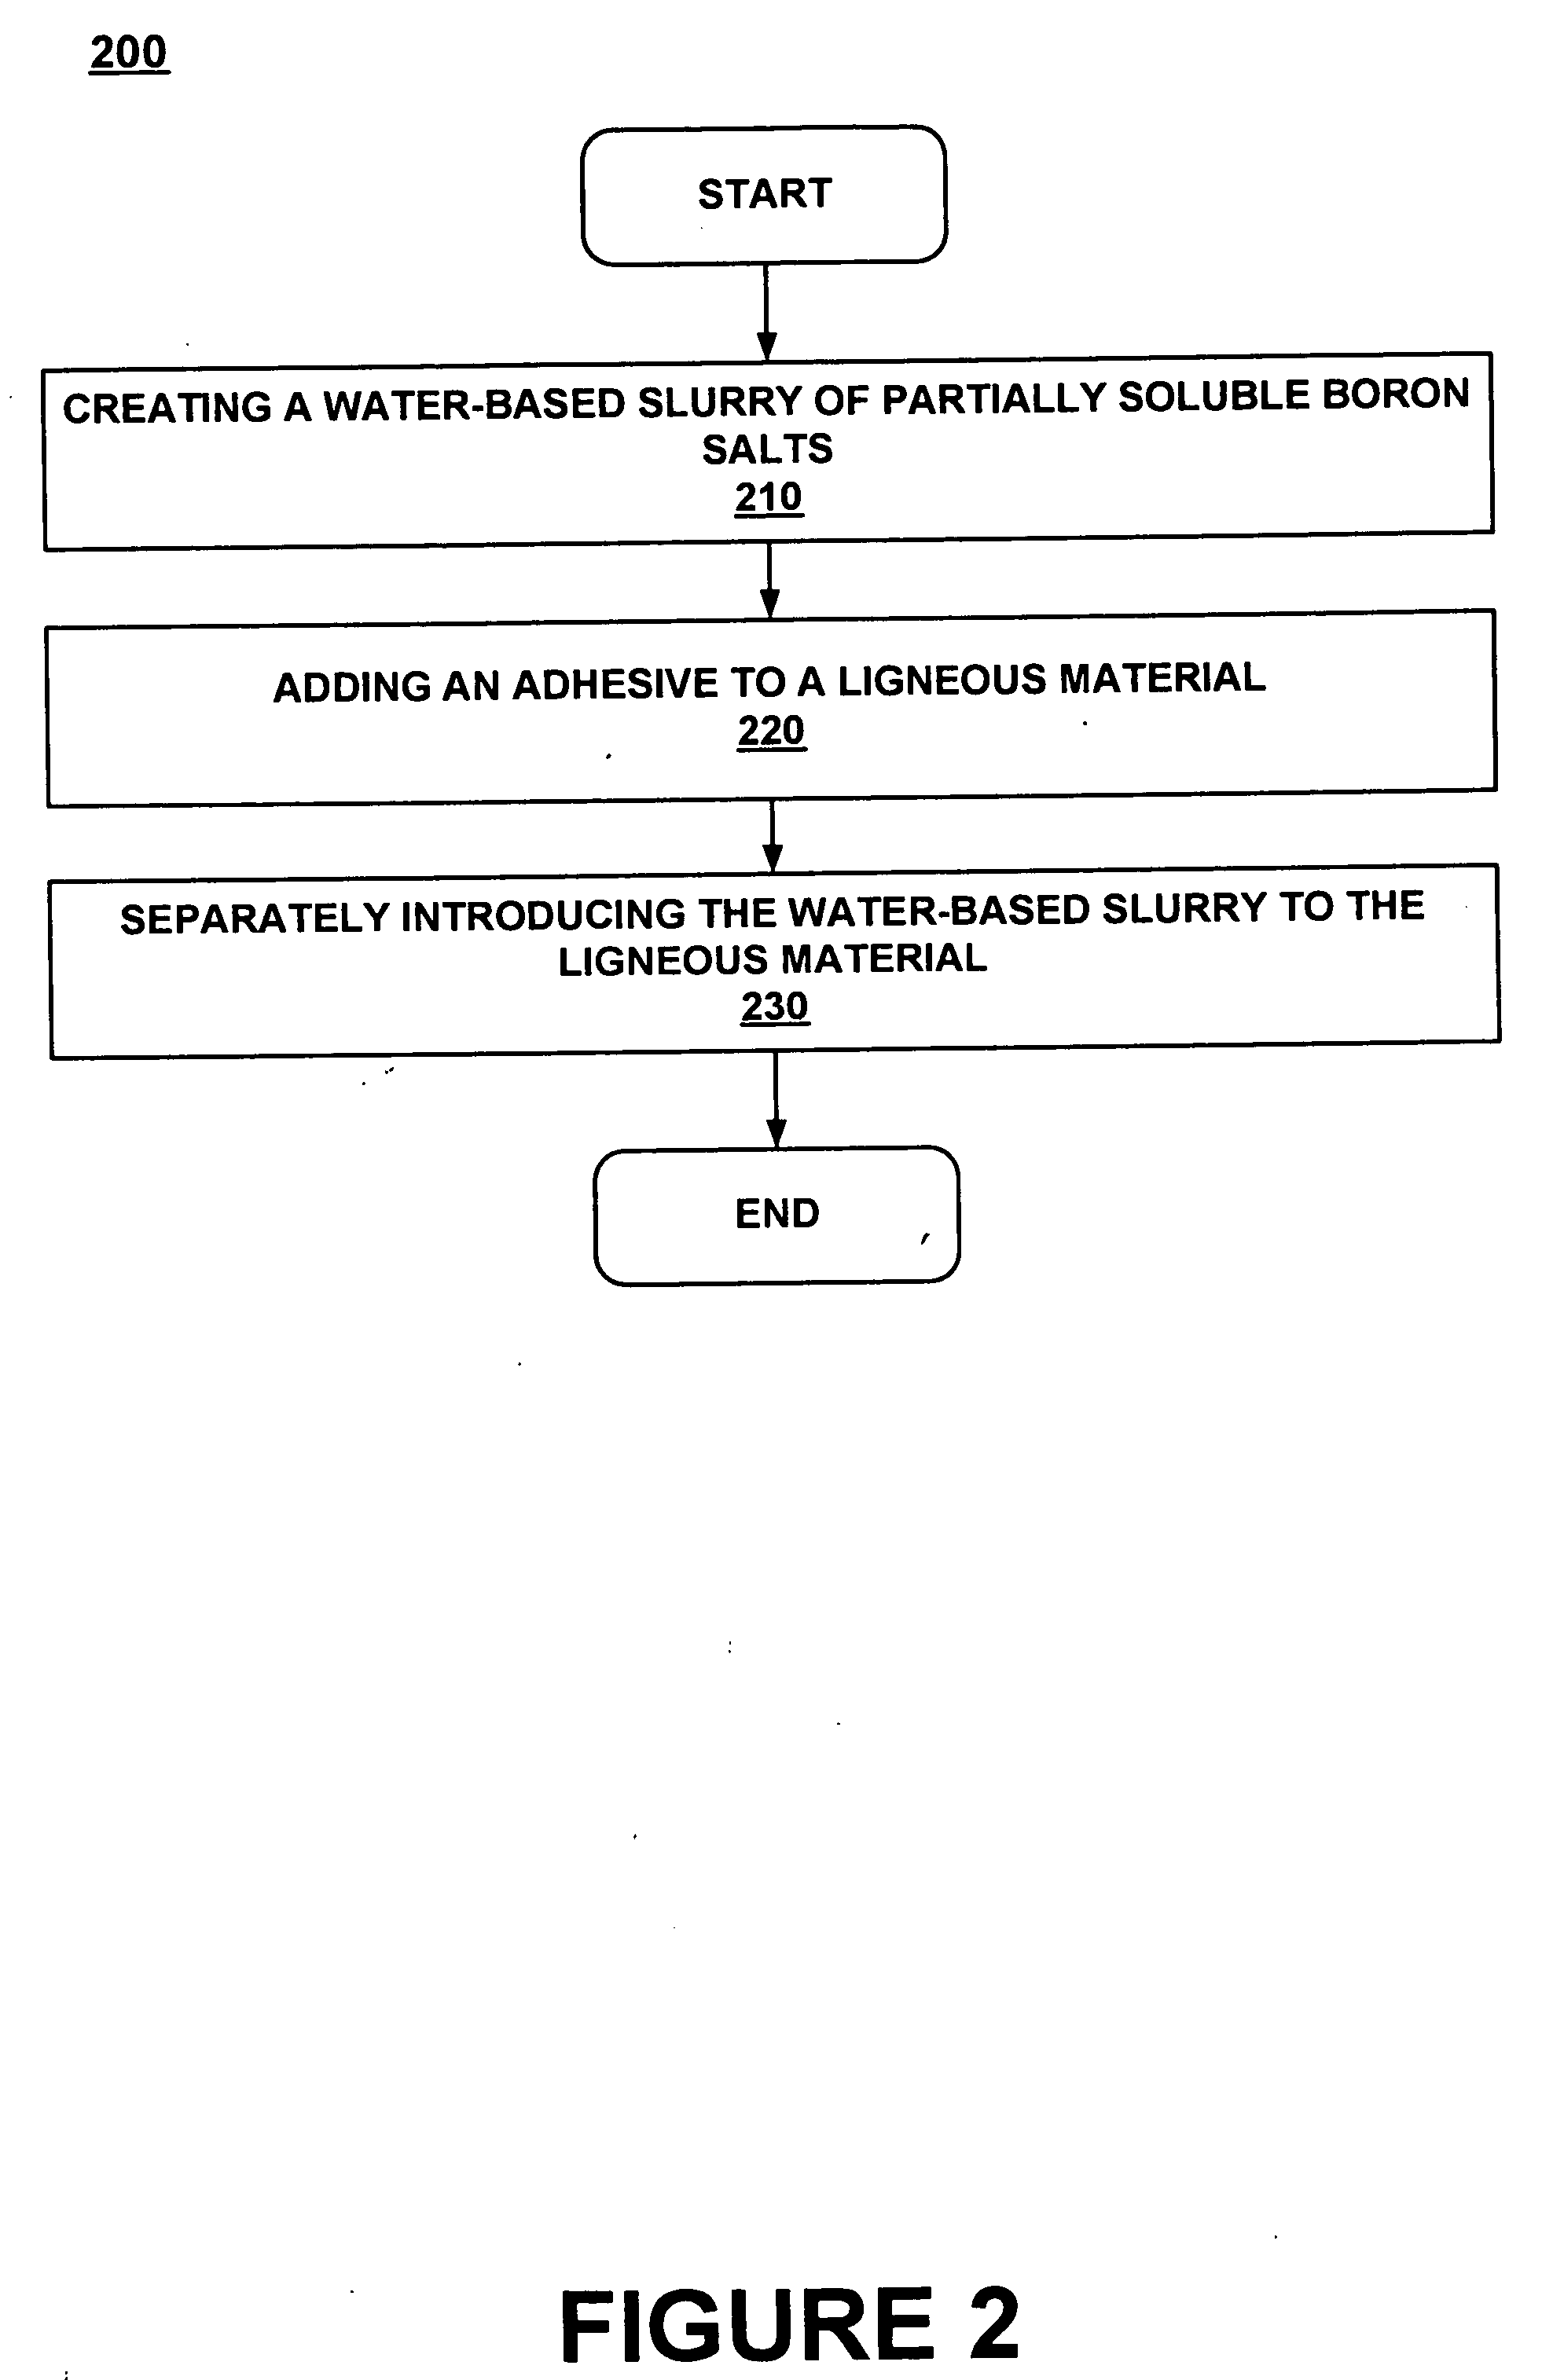 Fire retardant composite panel product and a method and system for fabricating same